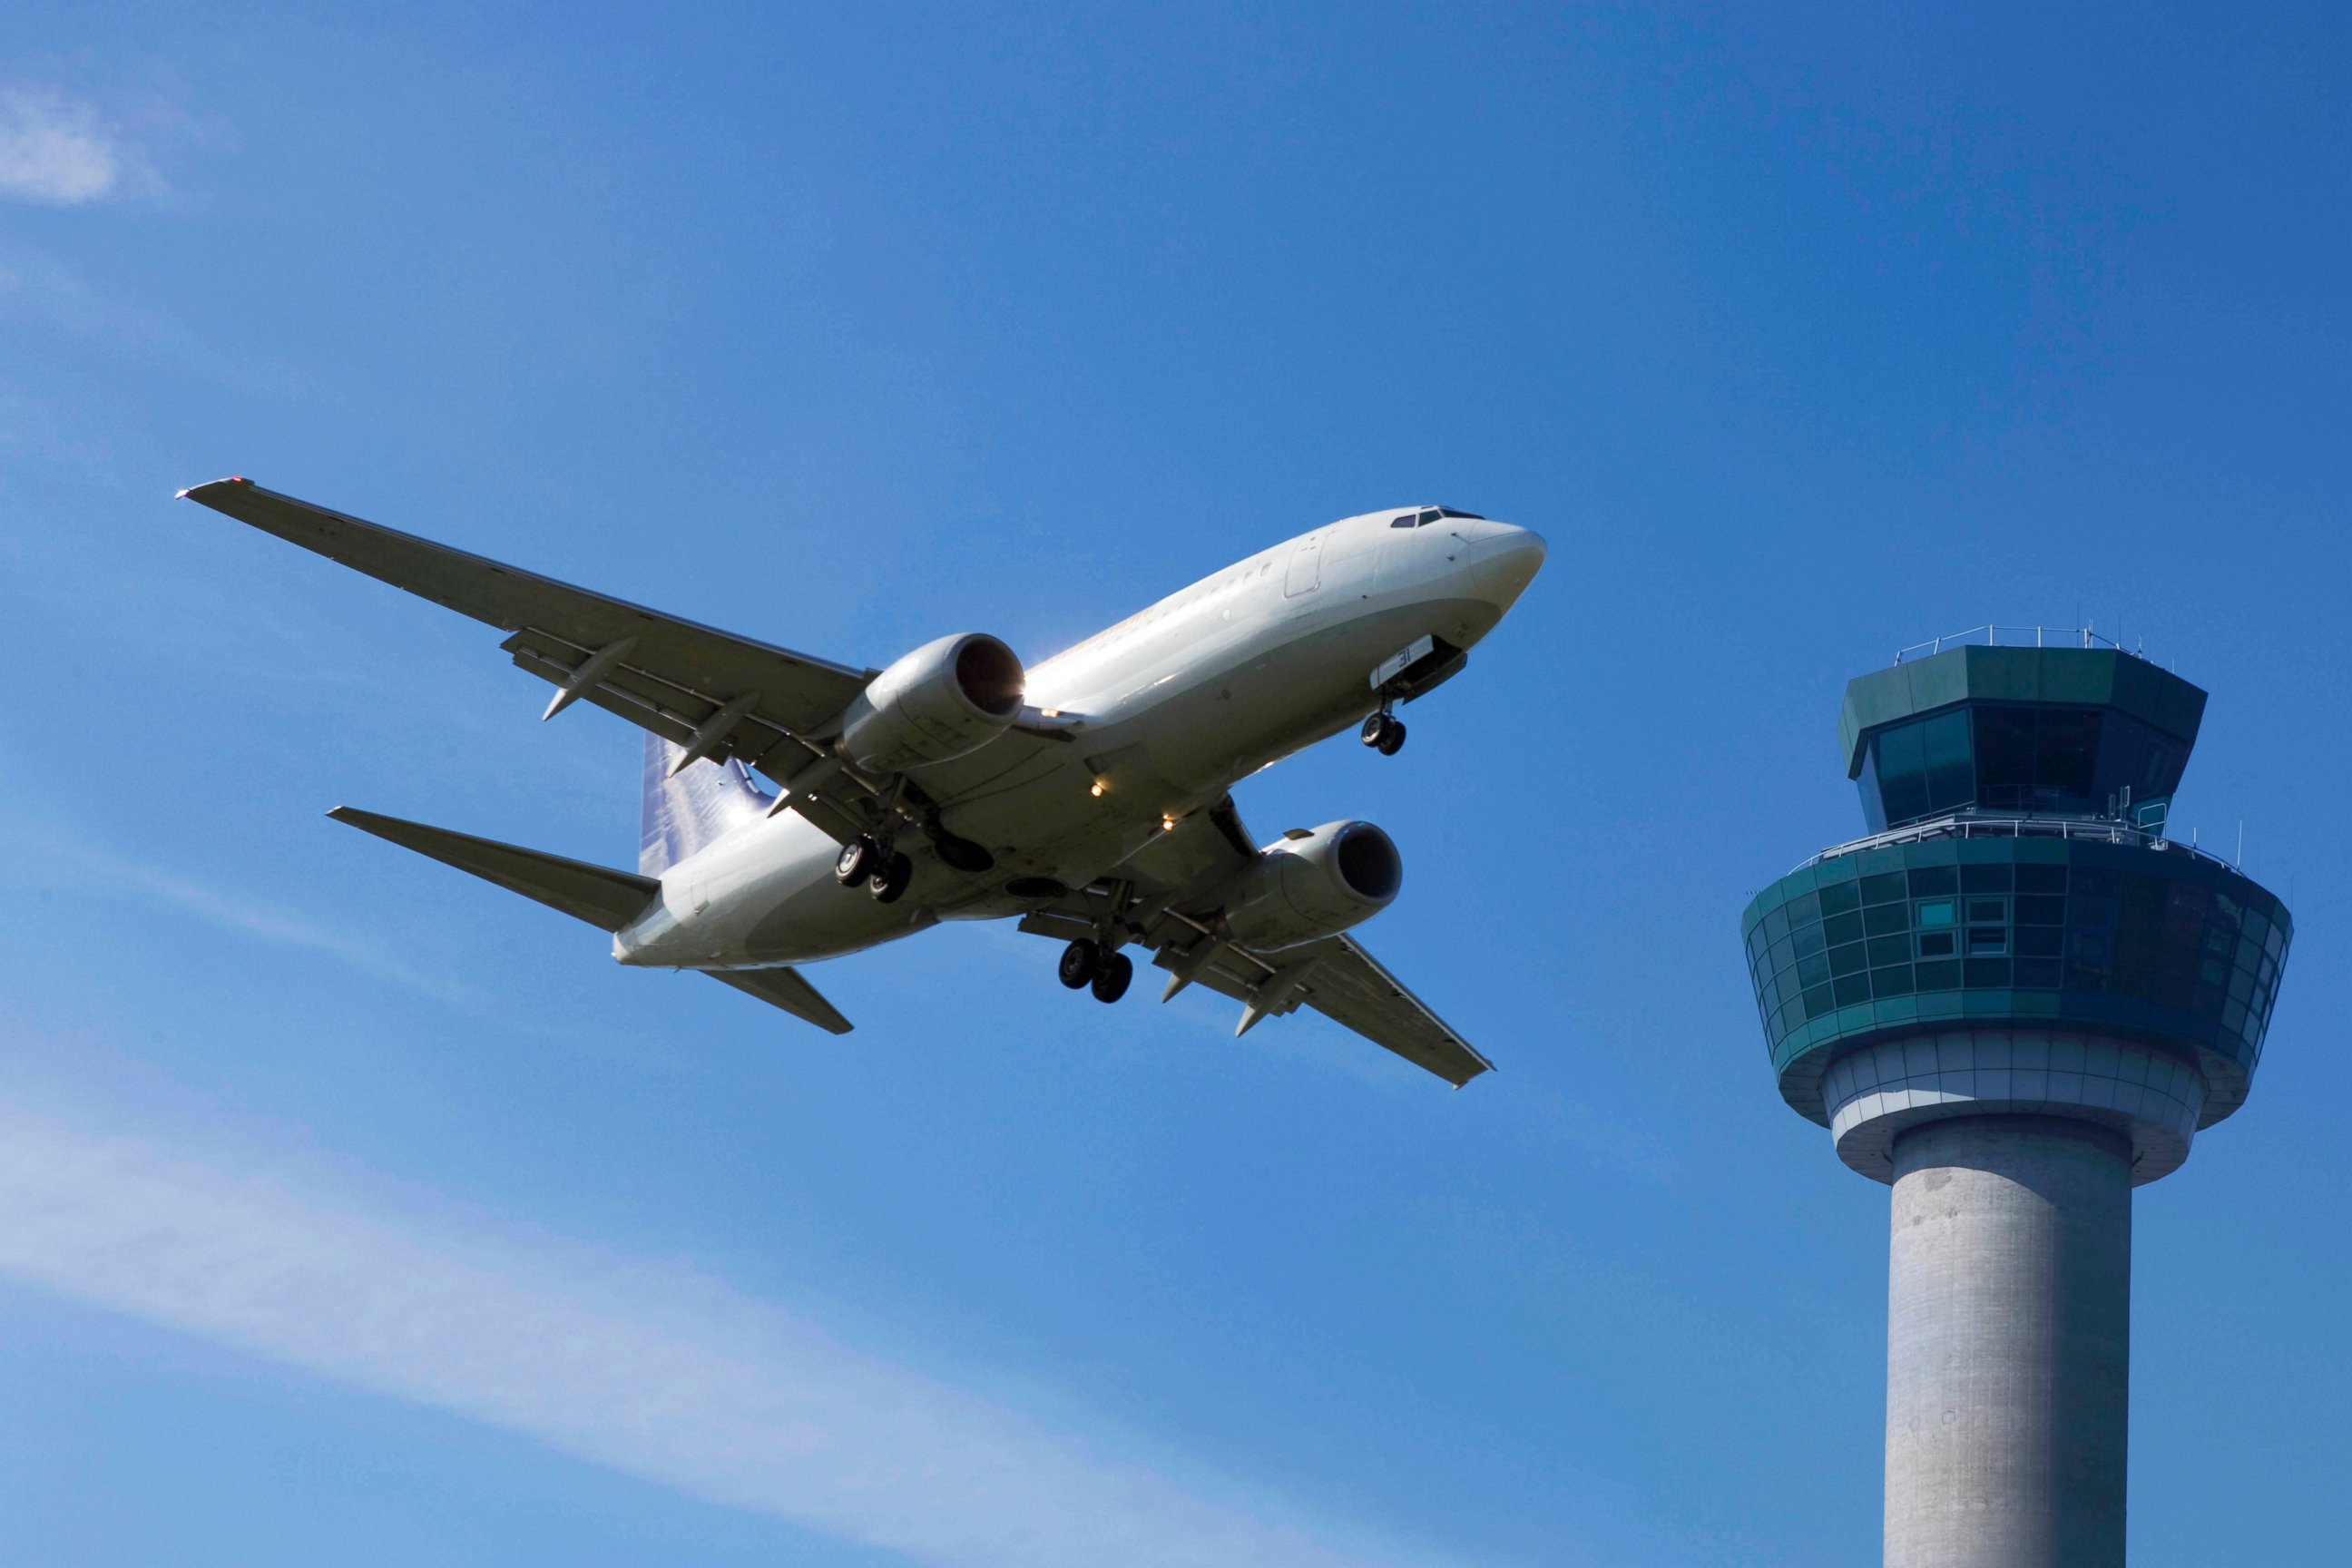 PHOTO: A plane flies past a control tower in this file photo.